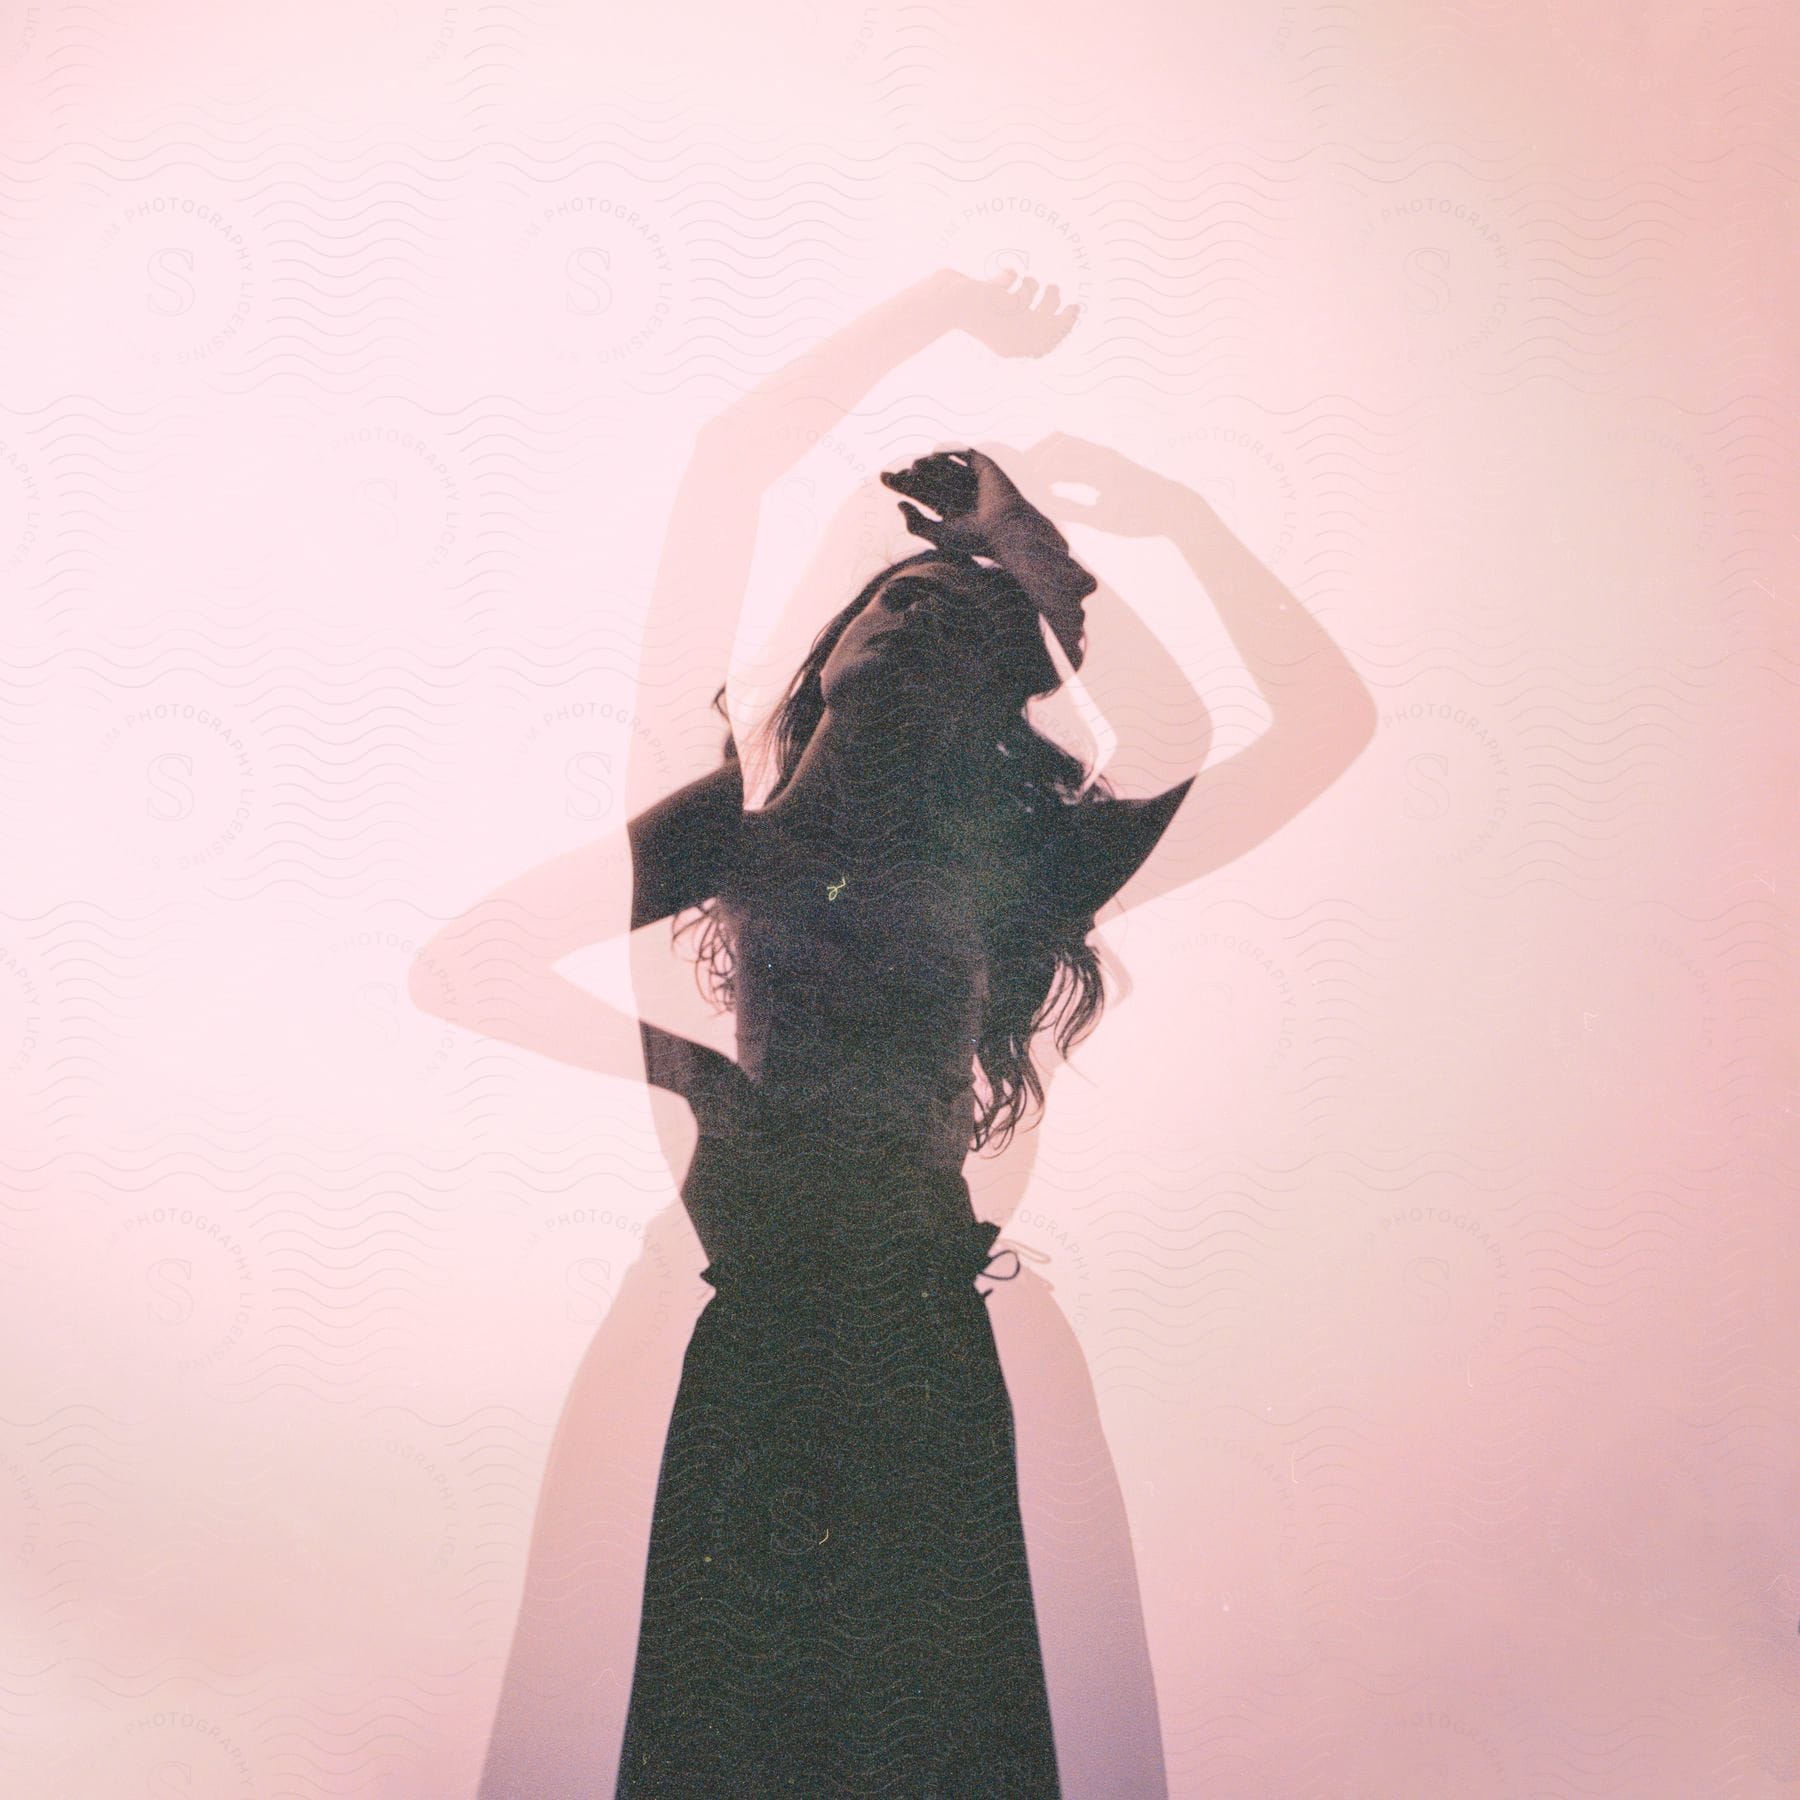 Woman in silhouette performing a dancelike movement against a pink background in a double exposure image